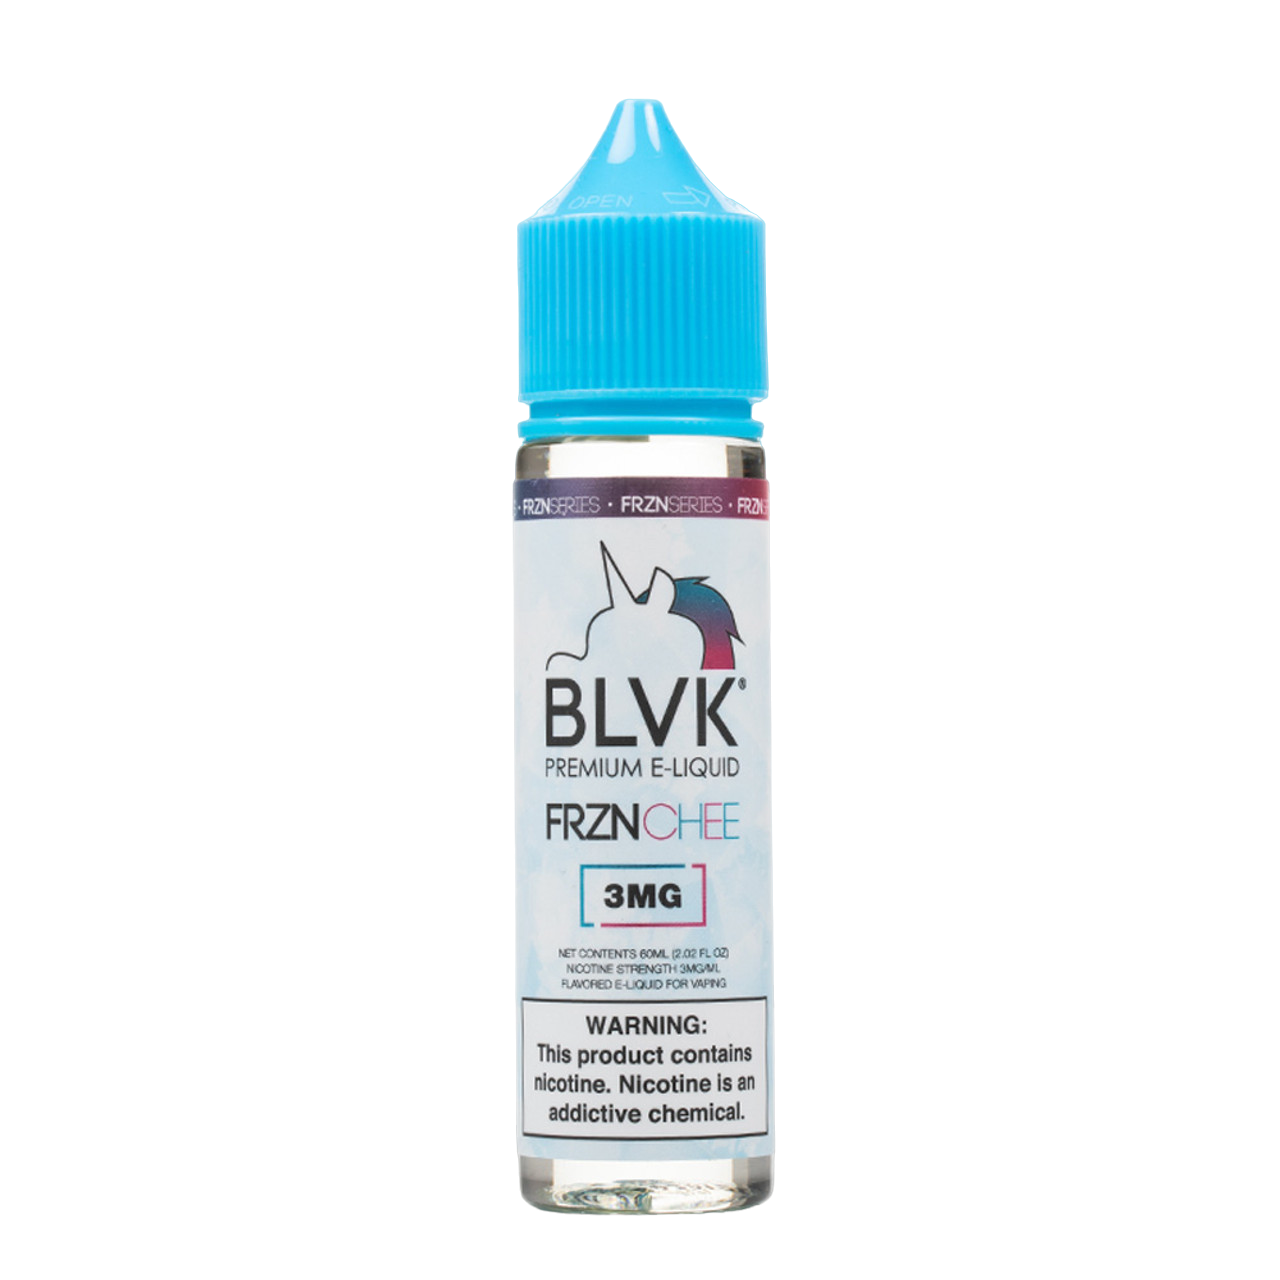 BLVK FRZN Synthetic Nicotine E-Liquid 60ML FRZN CHEE